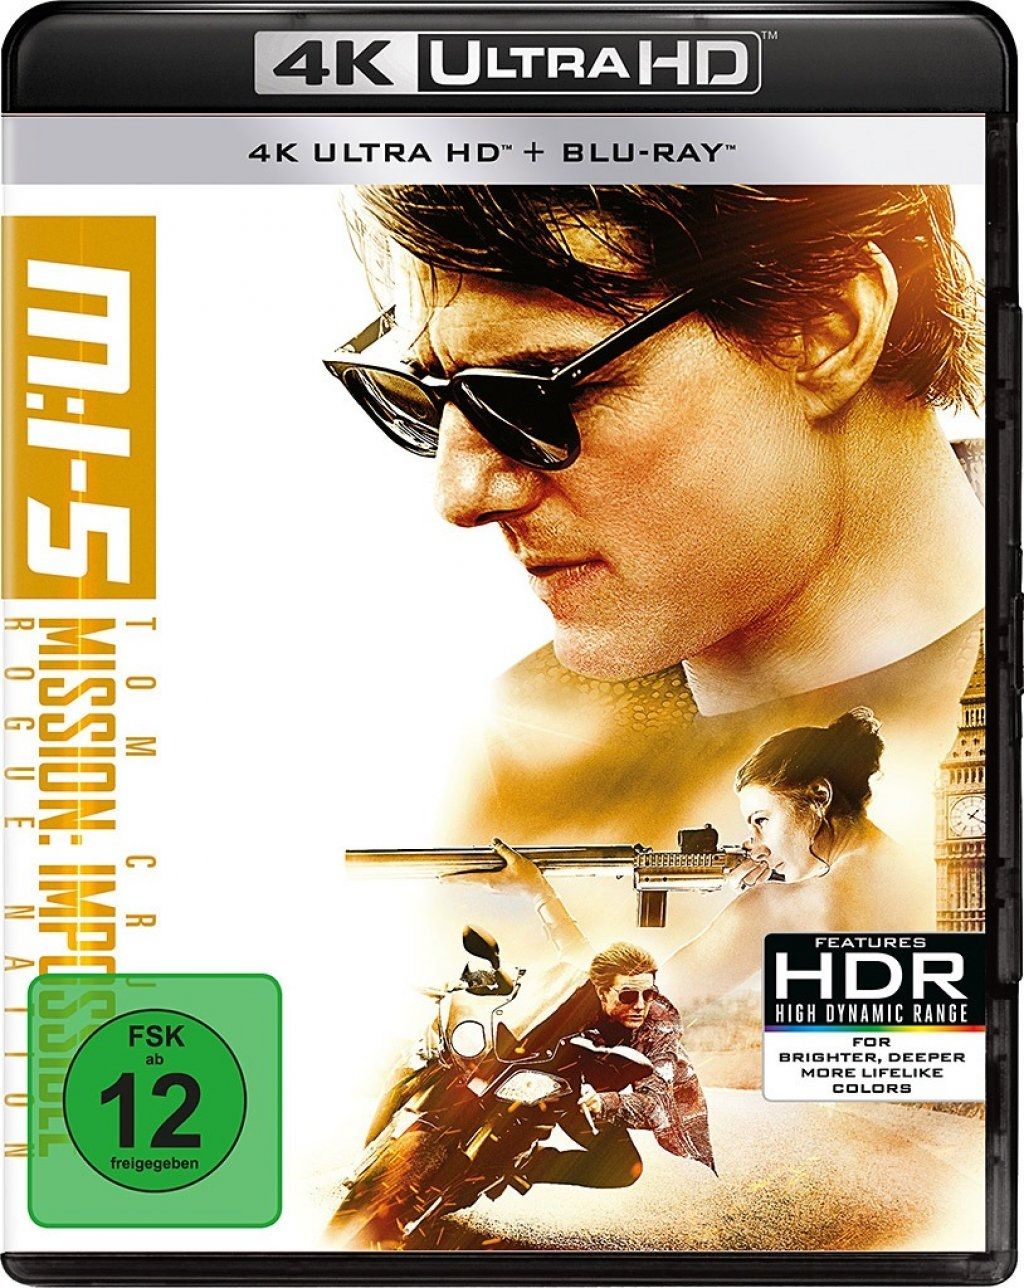 Mission: Impossible 5 - Rogue Nation (2 Discs) (UHD BLURAY + BLURAY)